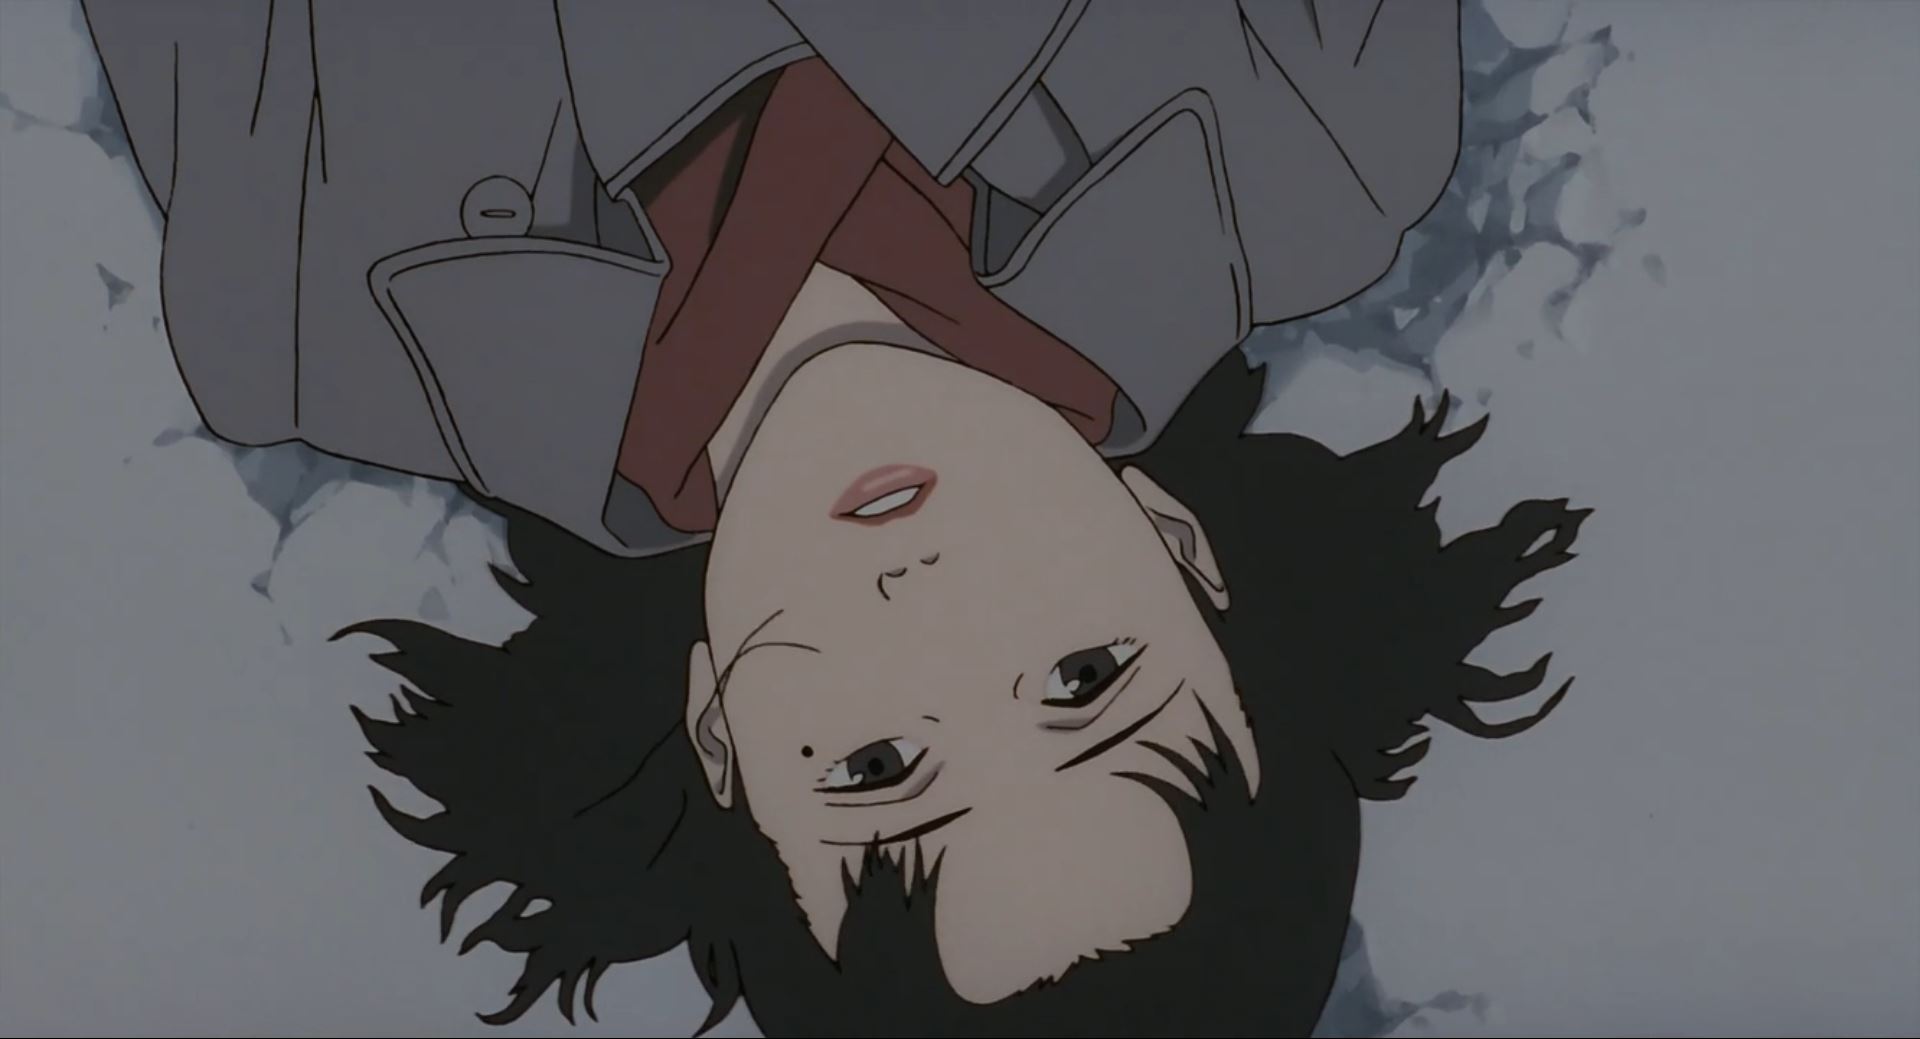 A middle-aged Chiyoko lying down face-up in the snow.